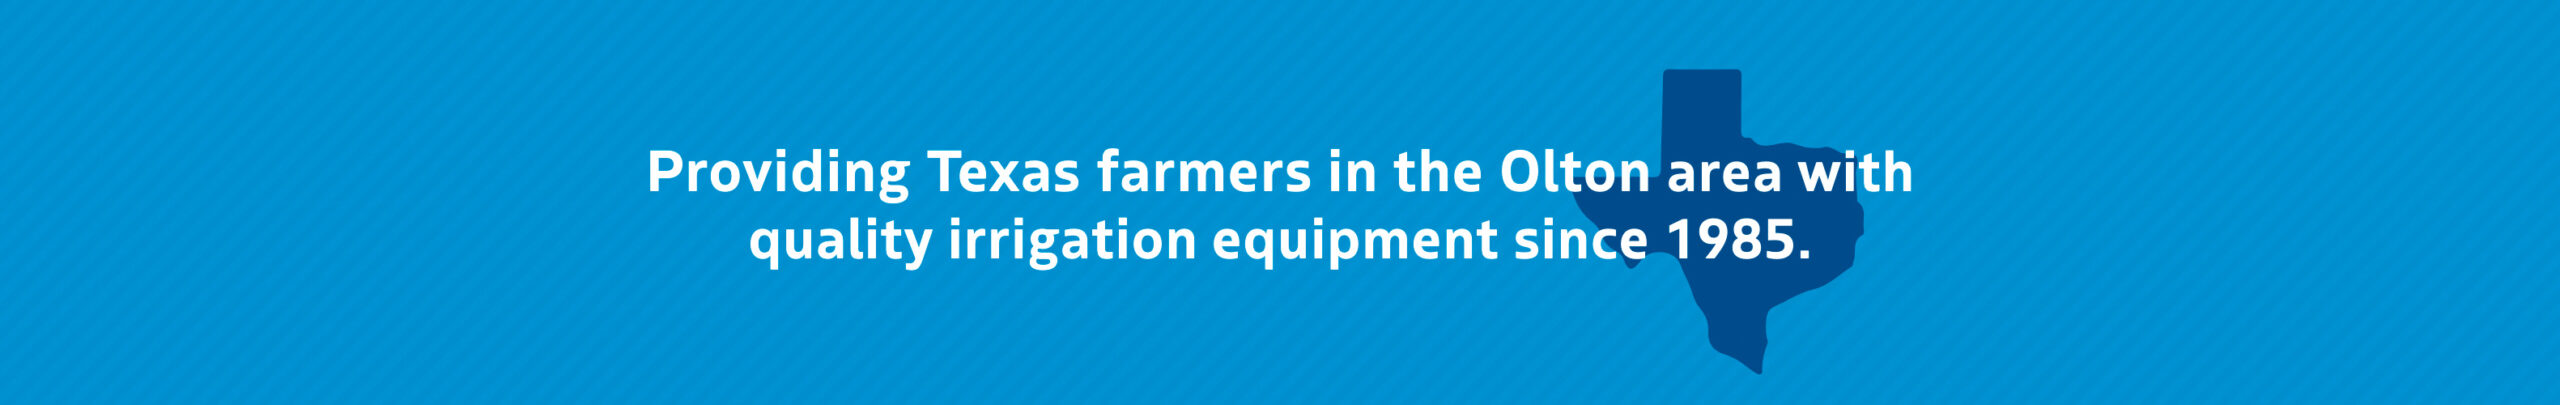 Providing Texas farmers in the Olton area with quality irrigation equipment since 1985